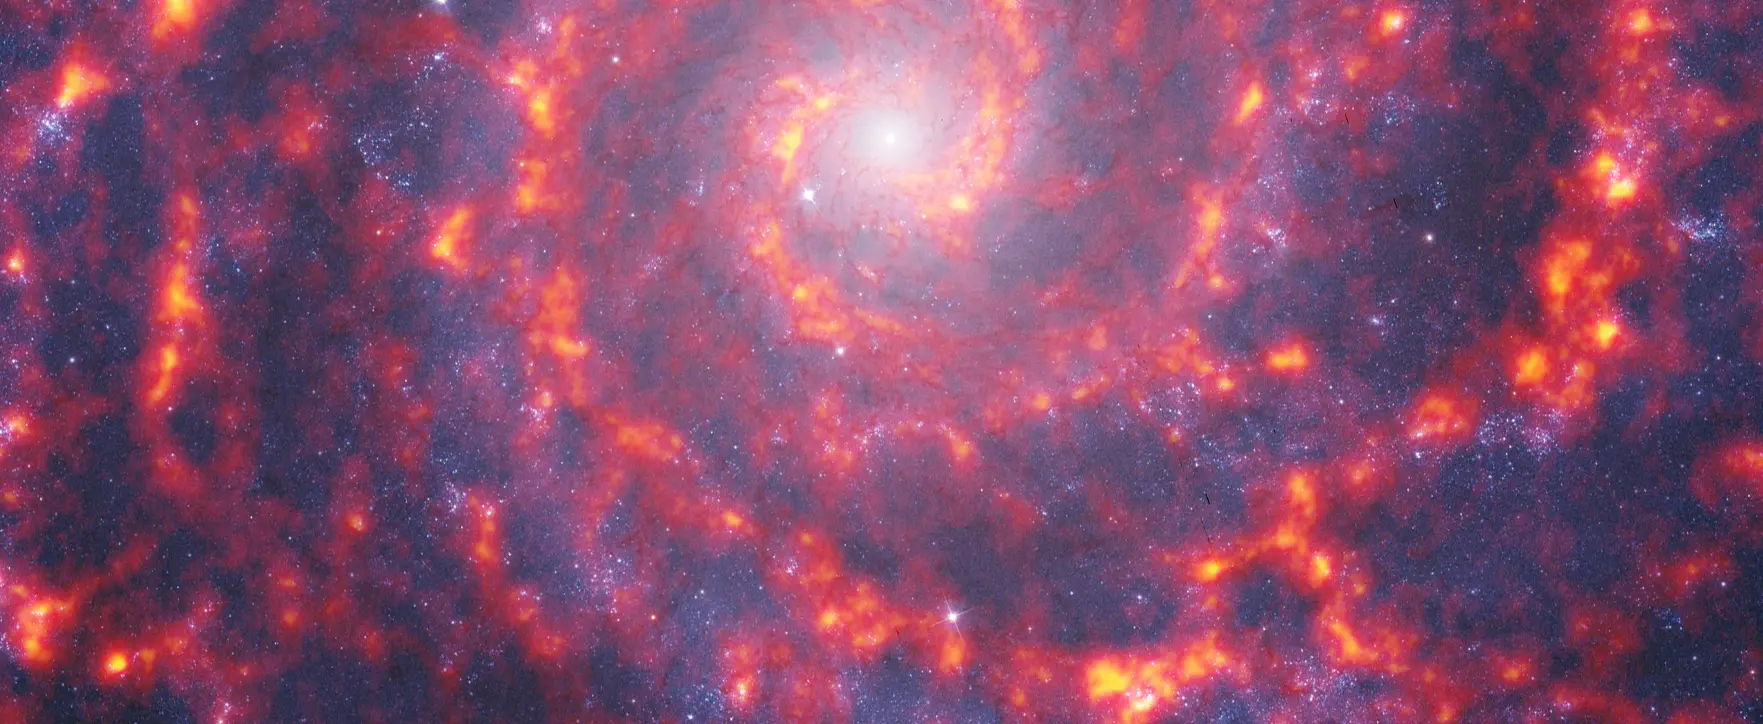 ALMA carries out large census of ‘star factories’ in other galaxies